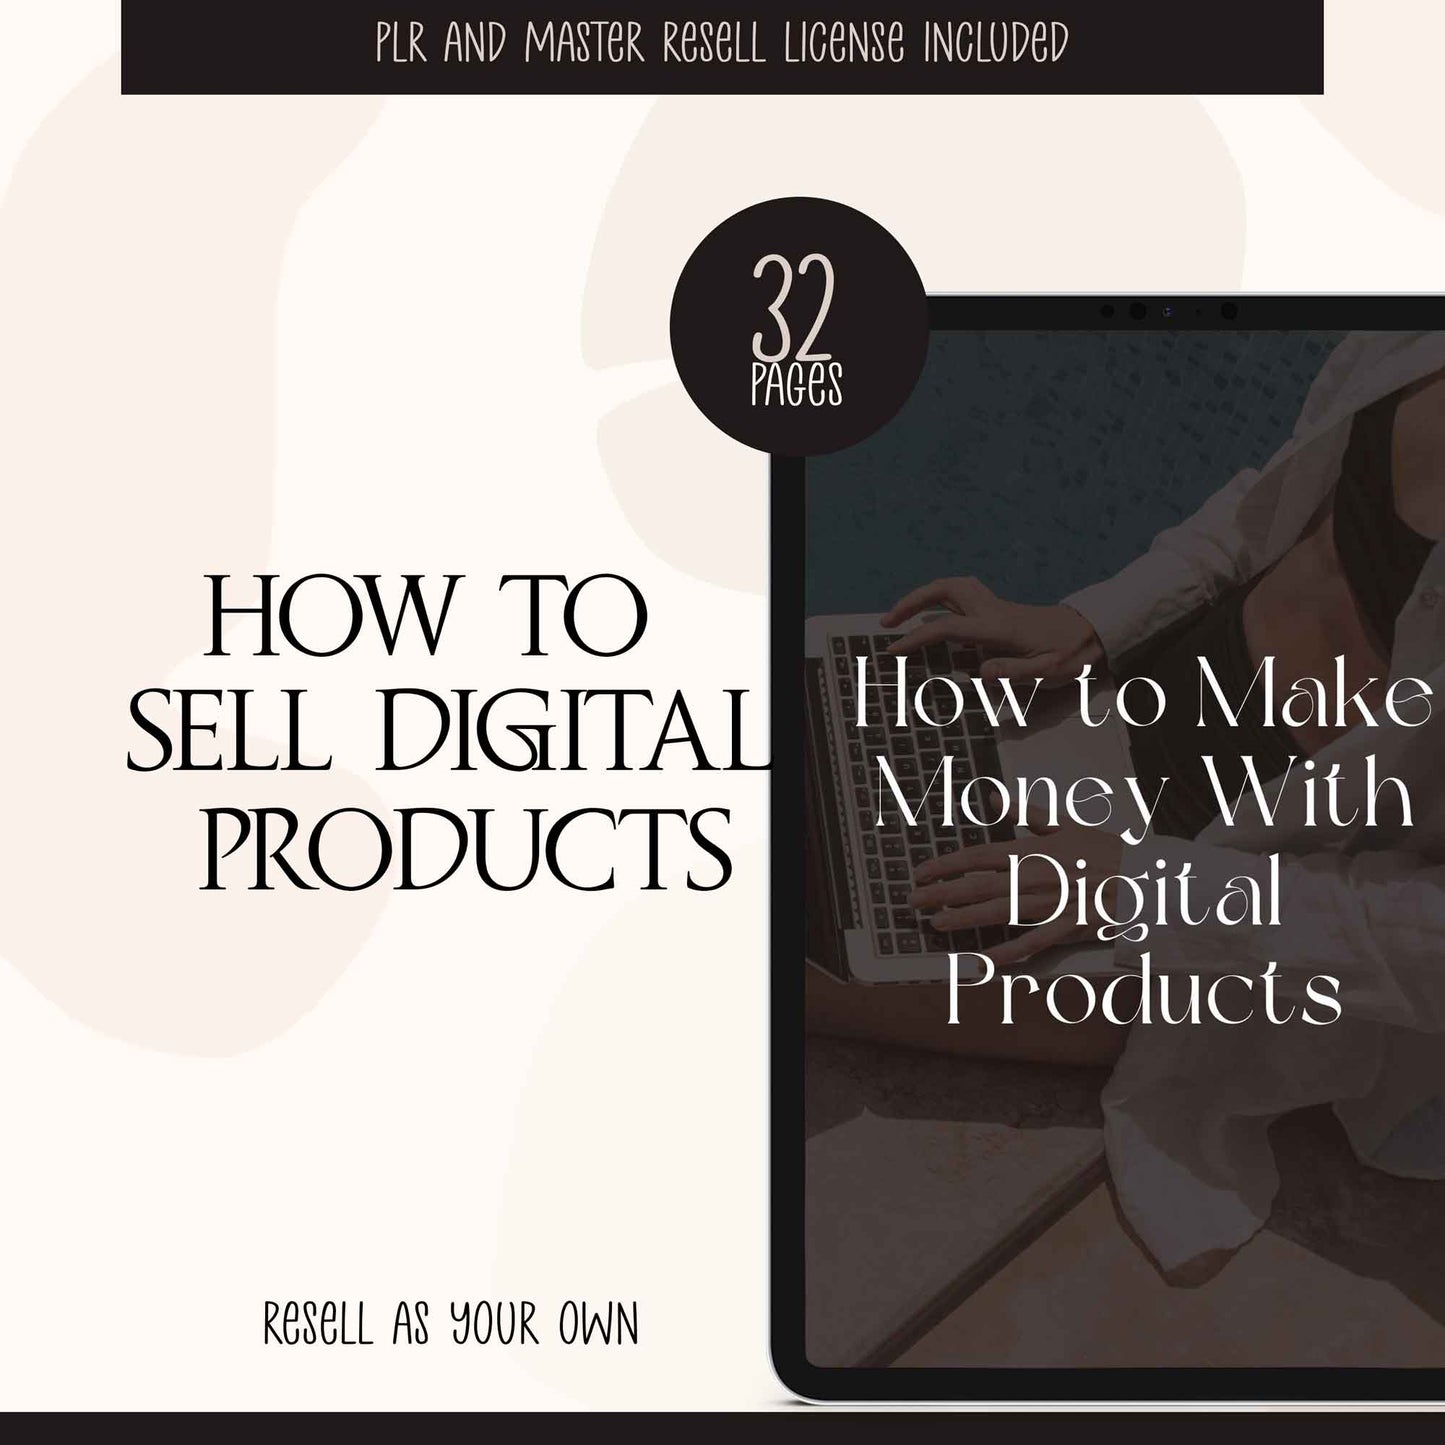 How To Sell Digital Products As A Beginner eBook